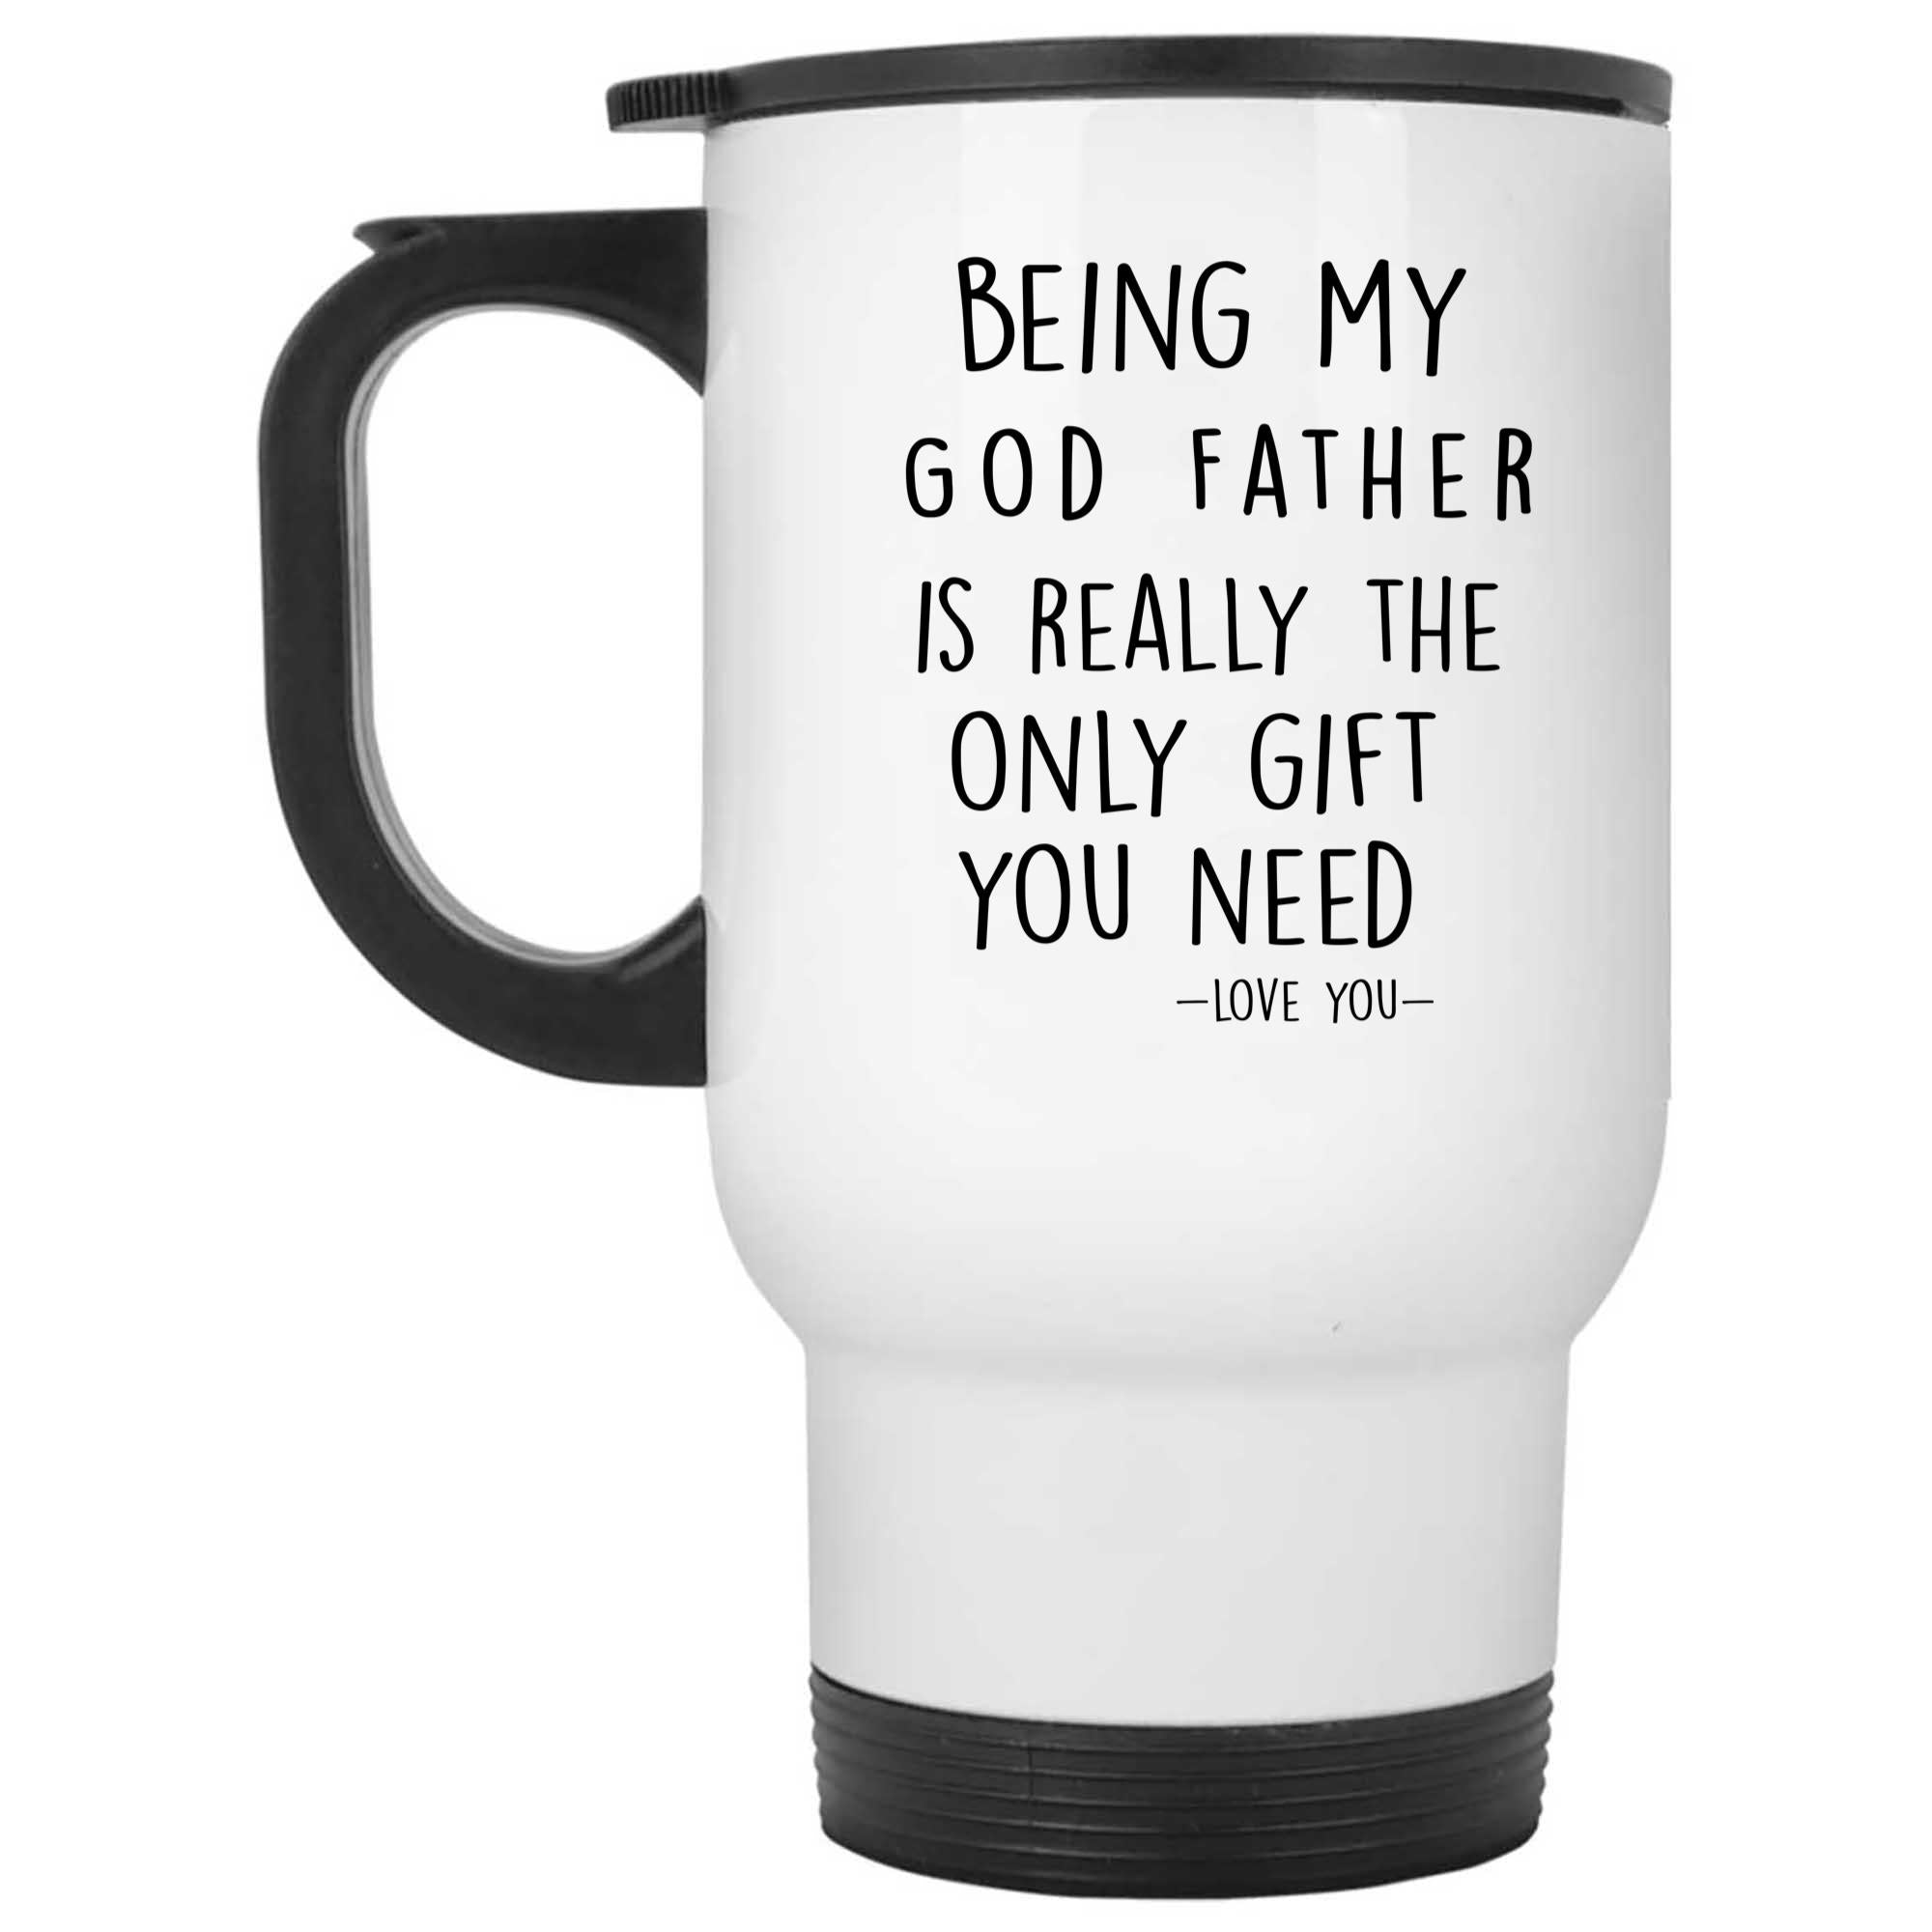 Skitongifts Funny Ceramic Novelty Coffee Mug Being My God Father Is Really The Only You Need  Love You God Father Funny 3S4hUvk